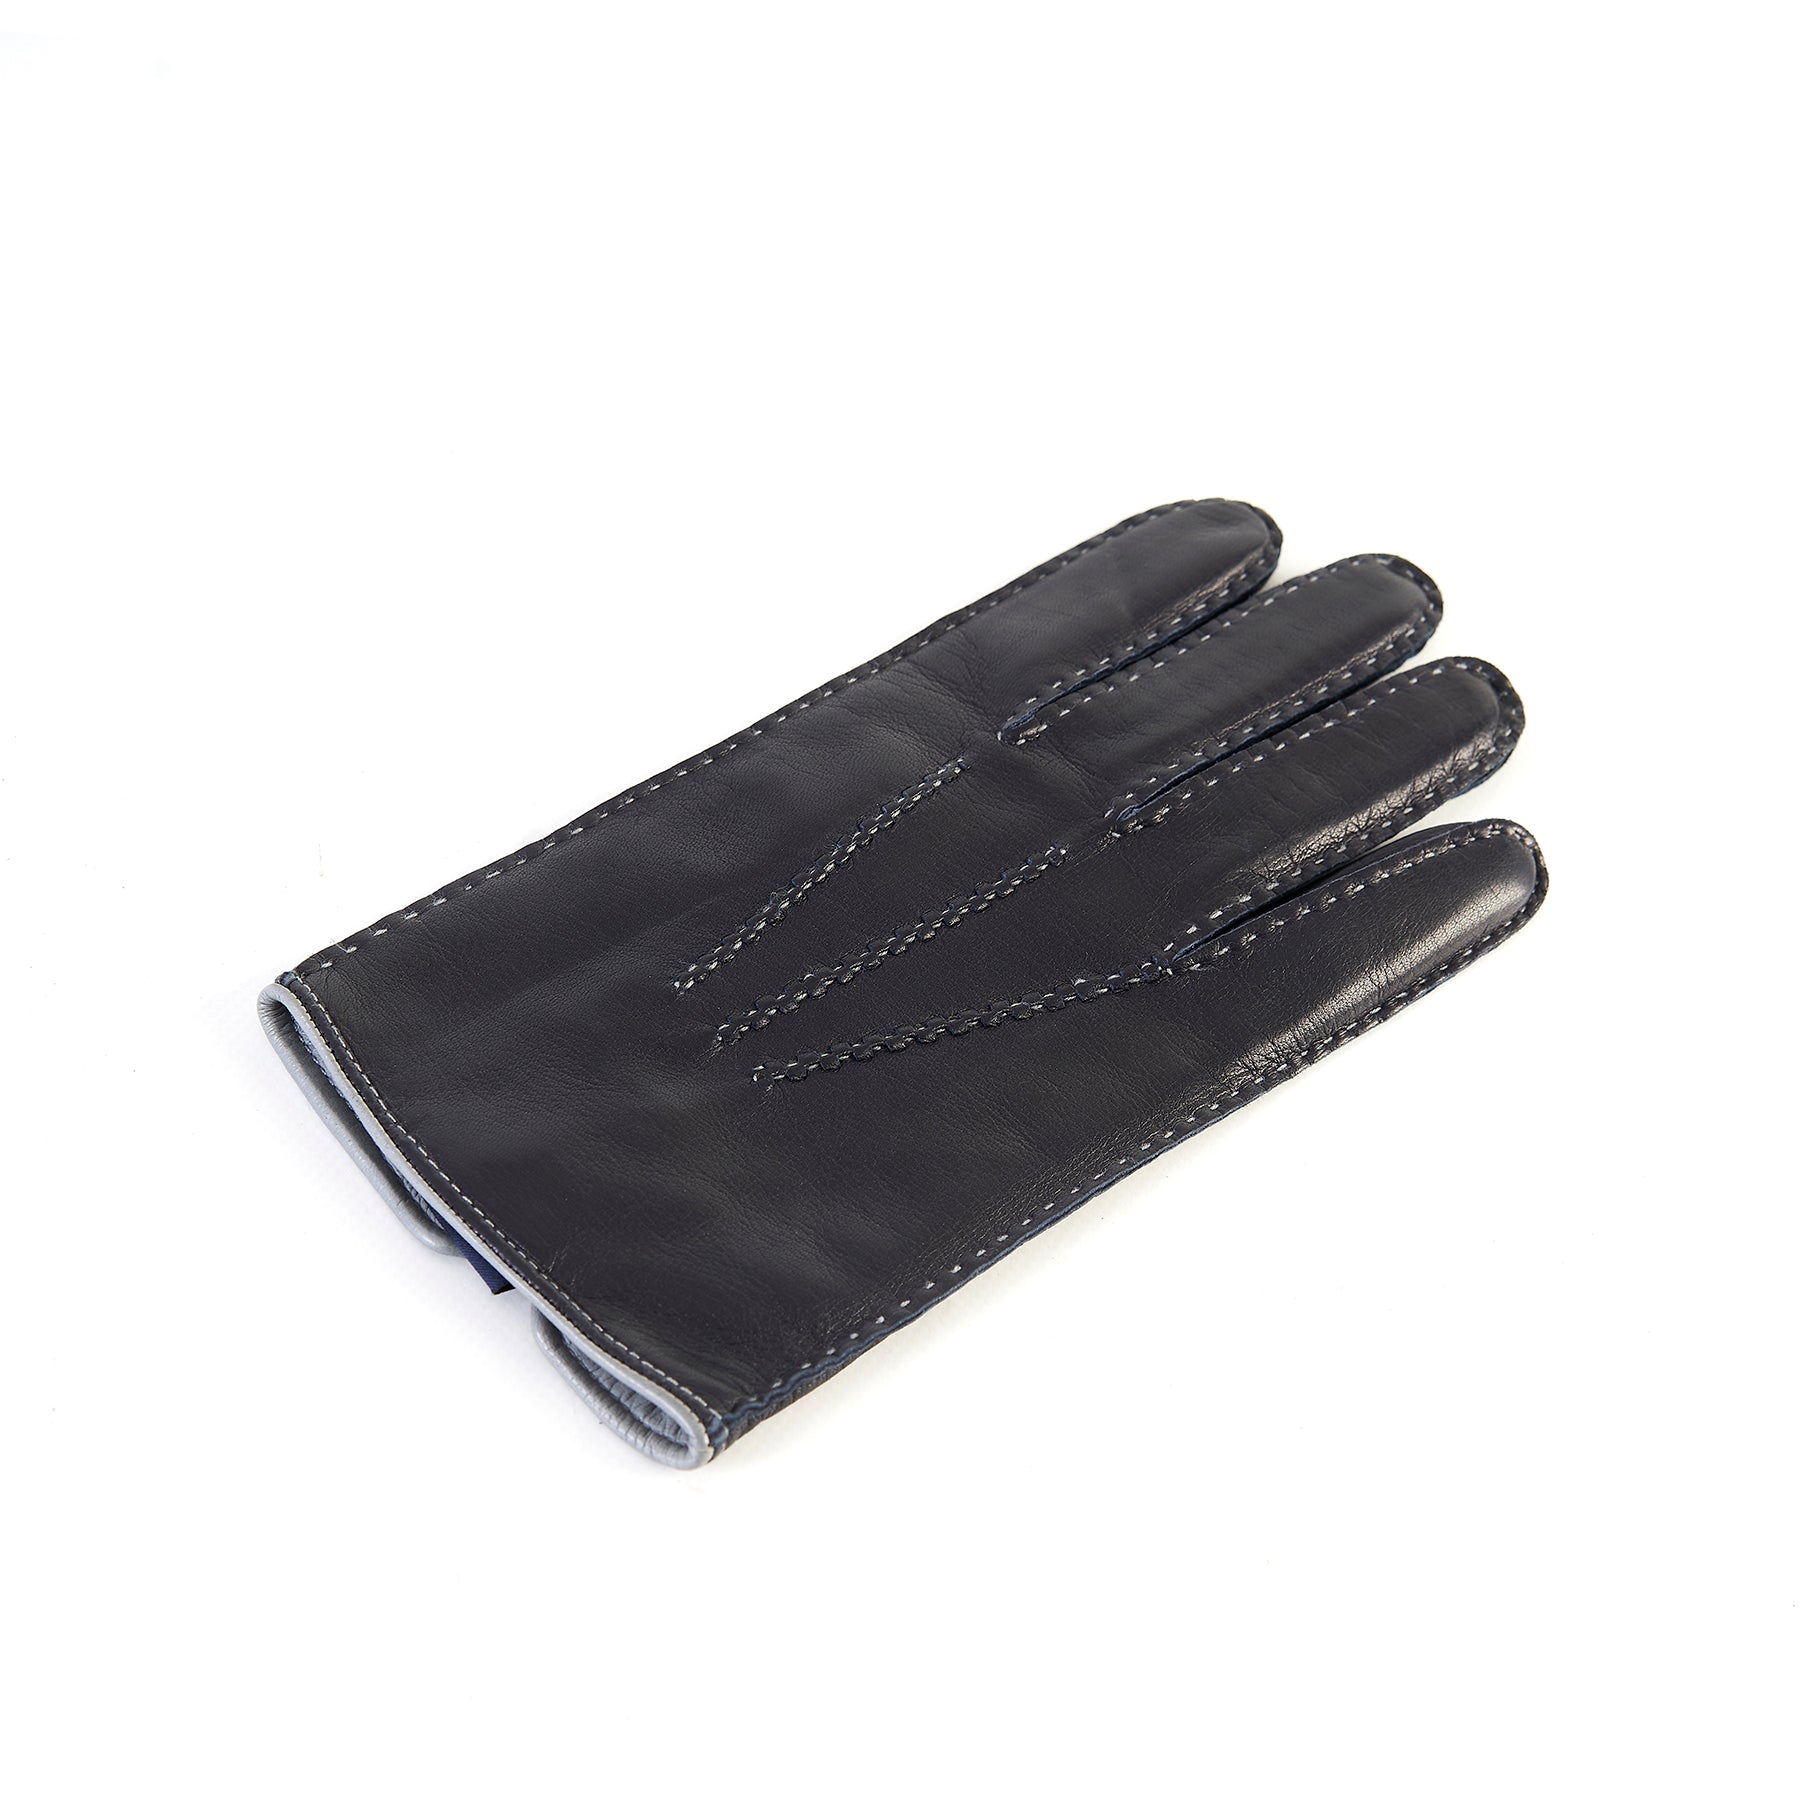 Men's fully hand-stitched blue nappa leather gloves and cashmere lining